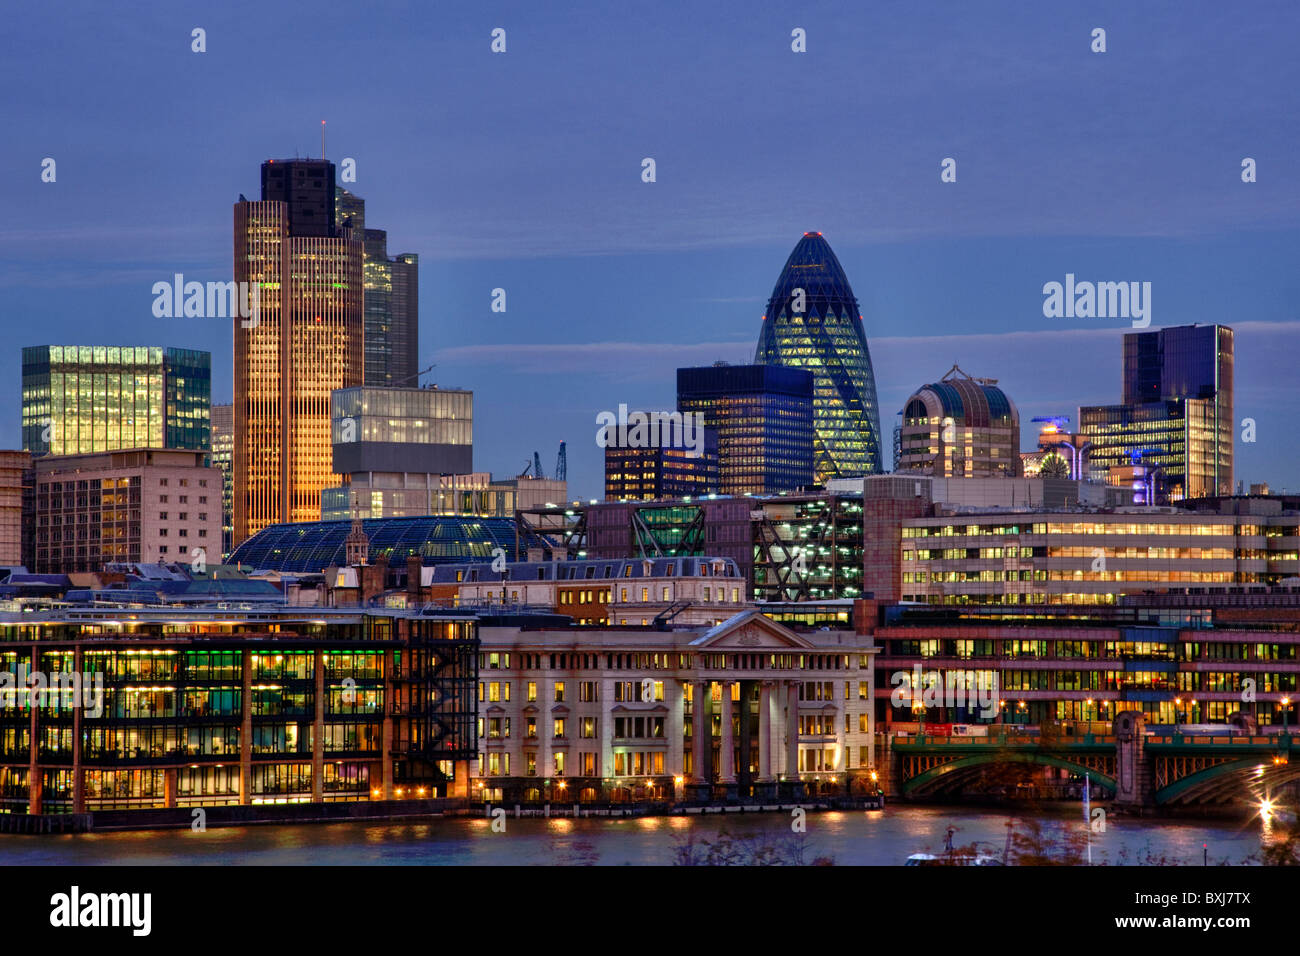 Night skyline of city financial district square mile London England Stock Photo